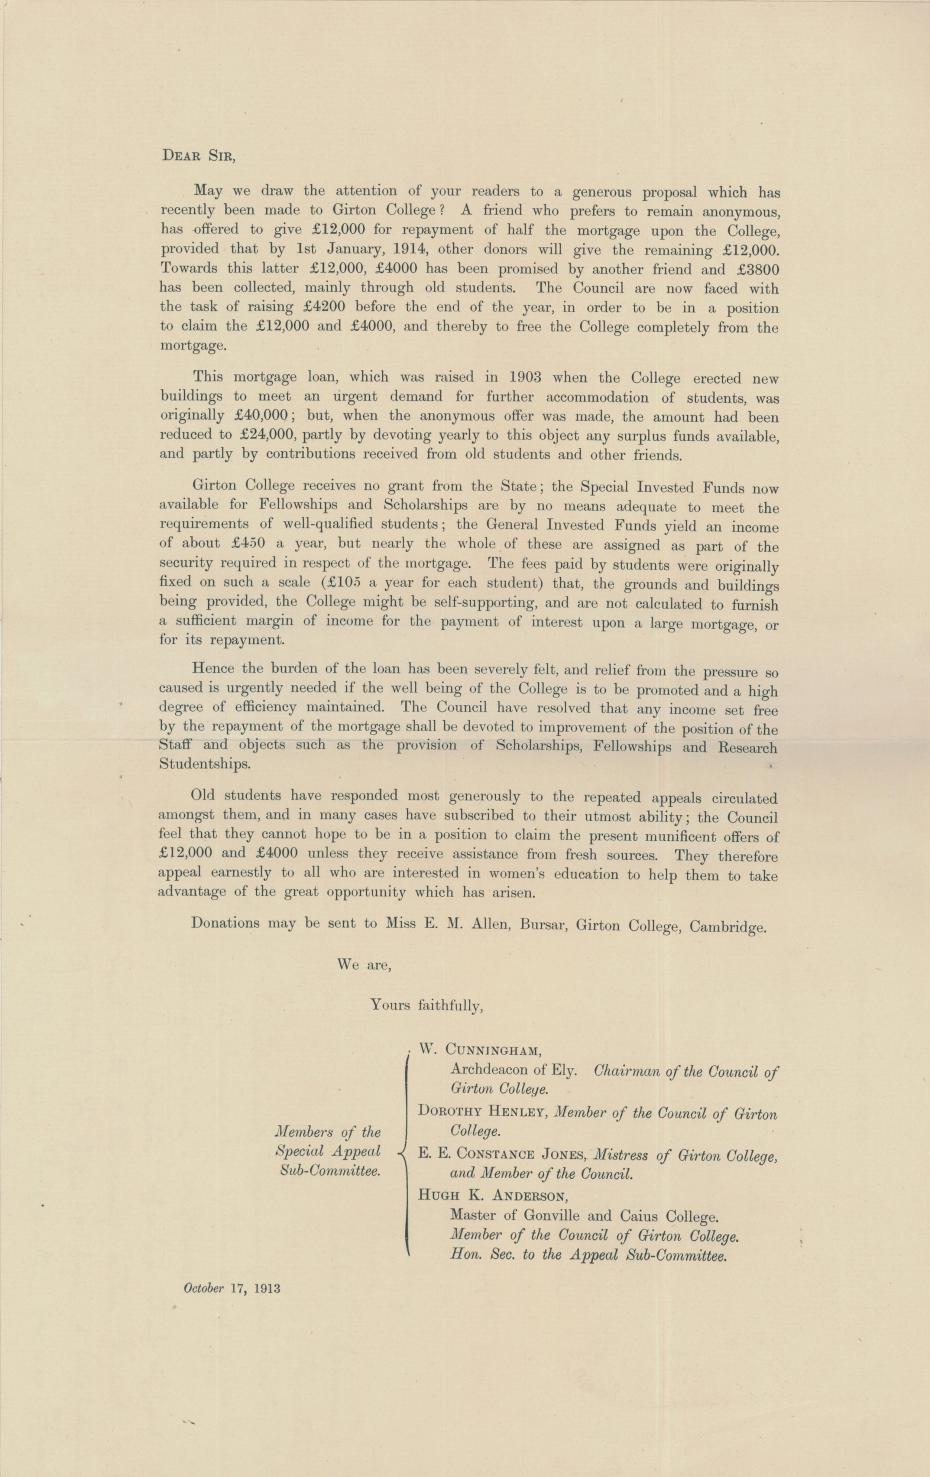 Appeal letter to the national newspapers, from the College Council minutes 14 October 1913 (archive reference: GCGB 2/1/20pt)